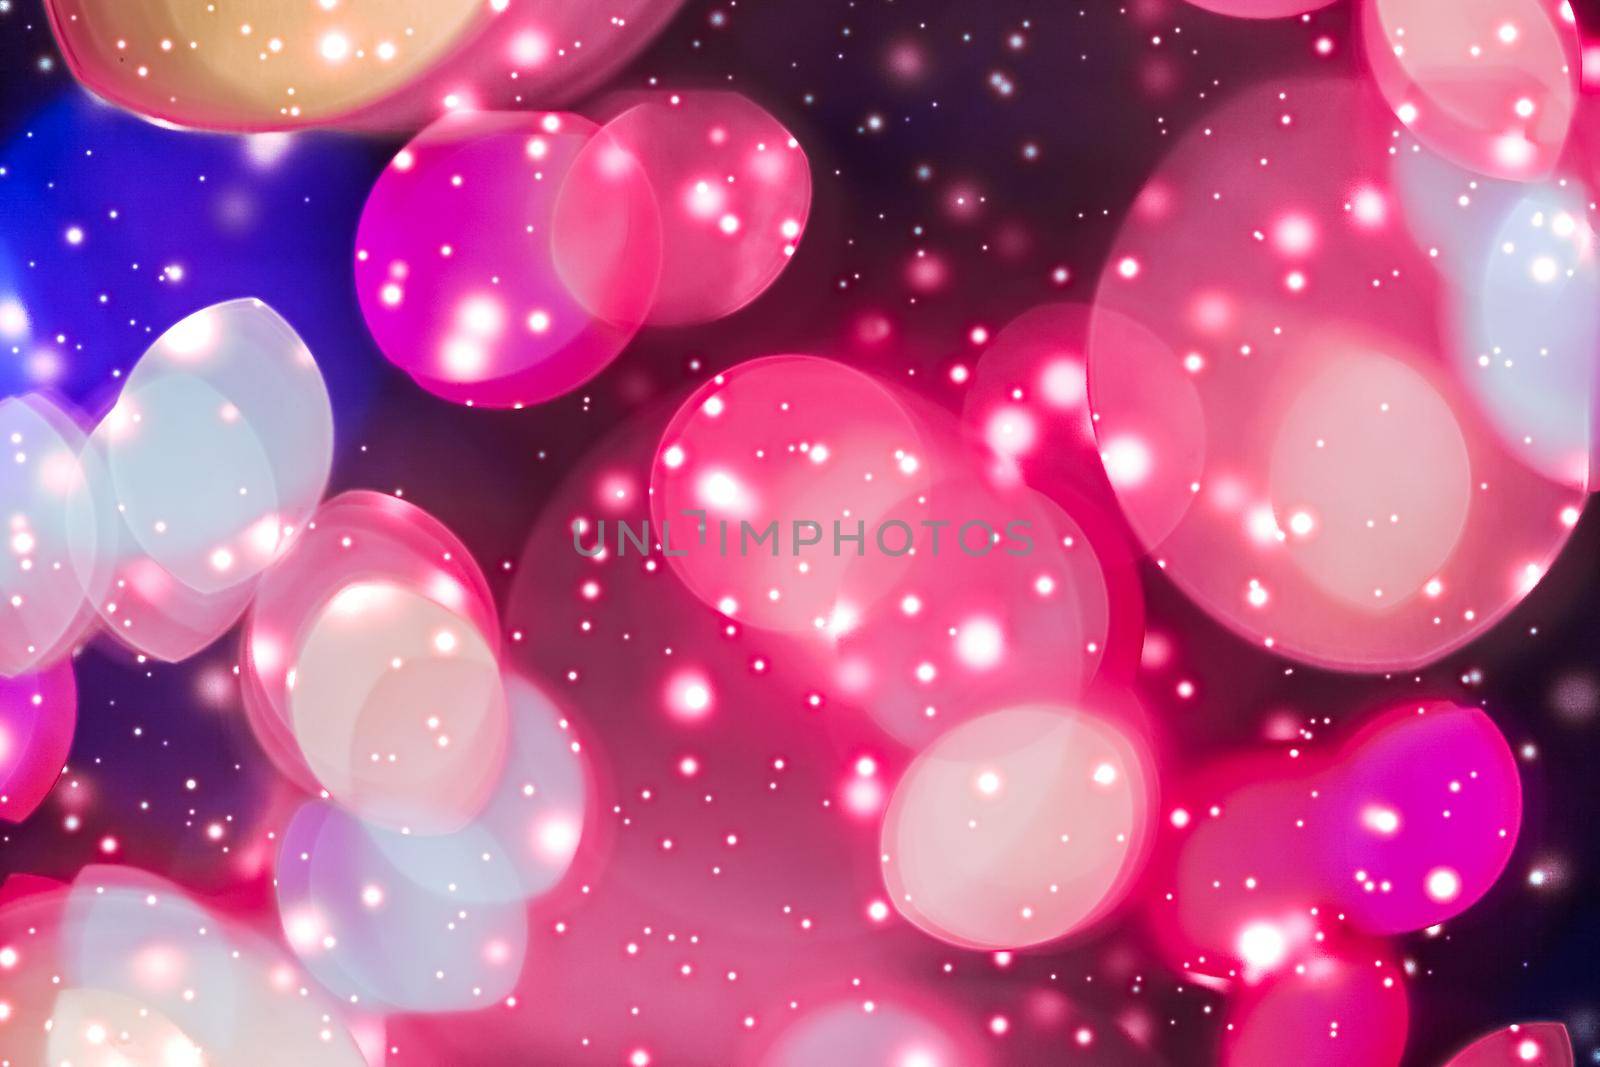 Sparkling bokeh, overlay design and cosmos texture concept - Abstract cosmic starry sky lights and shiny glitter, luxury holiday background